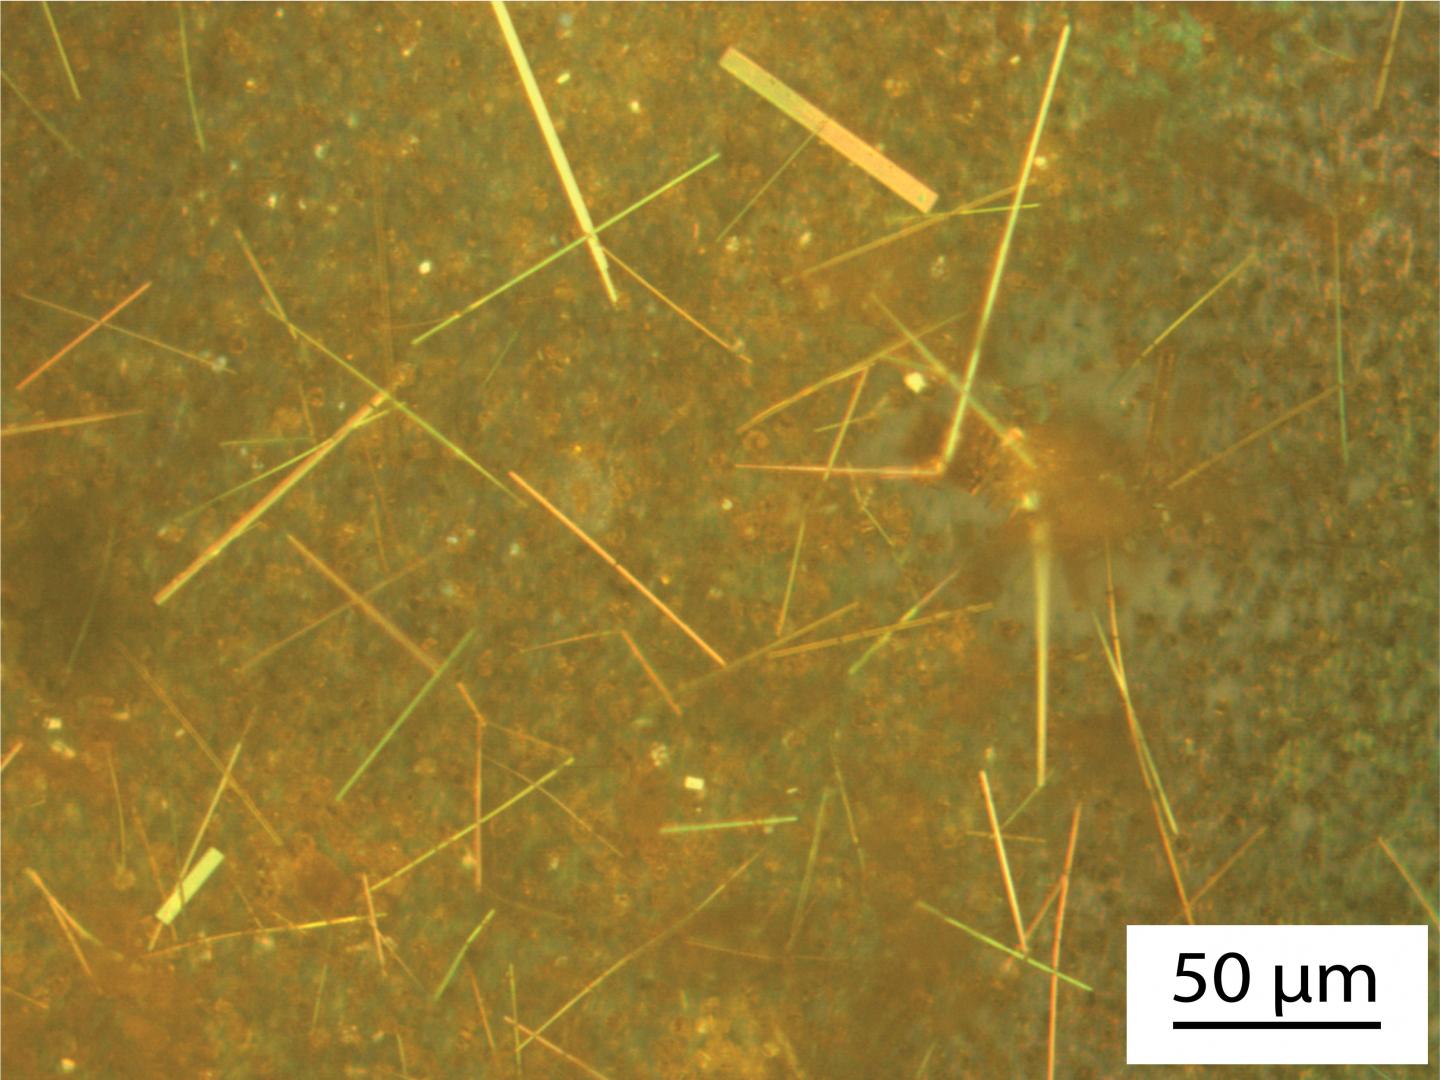 Nanowire Crystals (1 of 2)